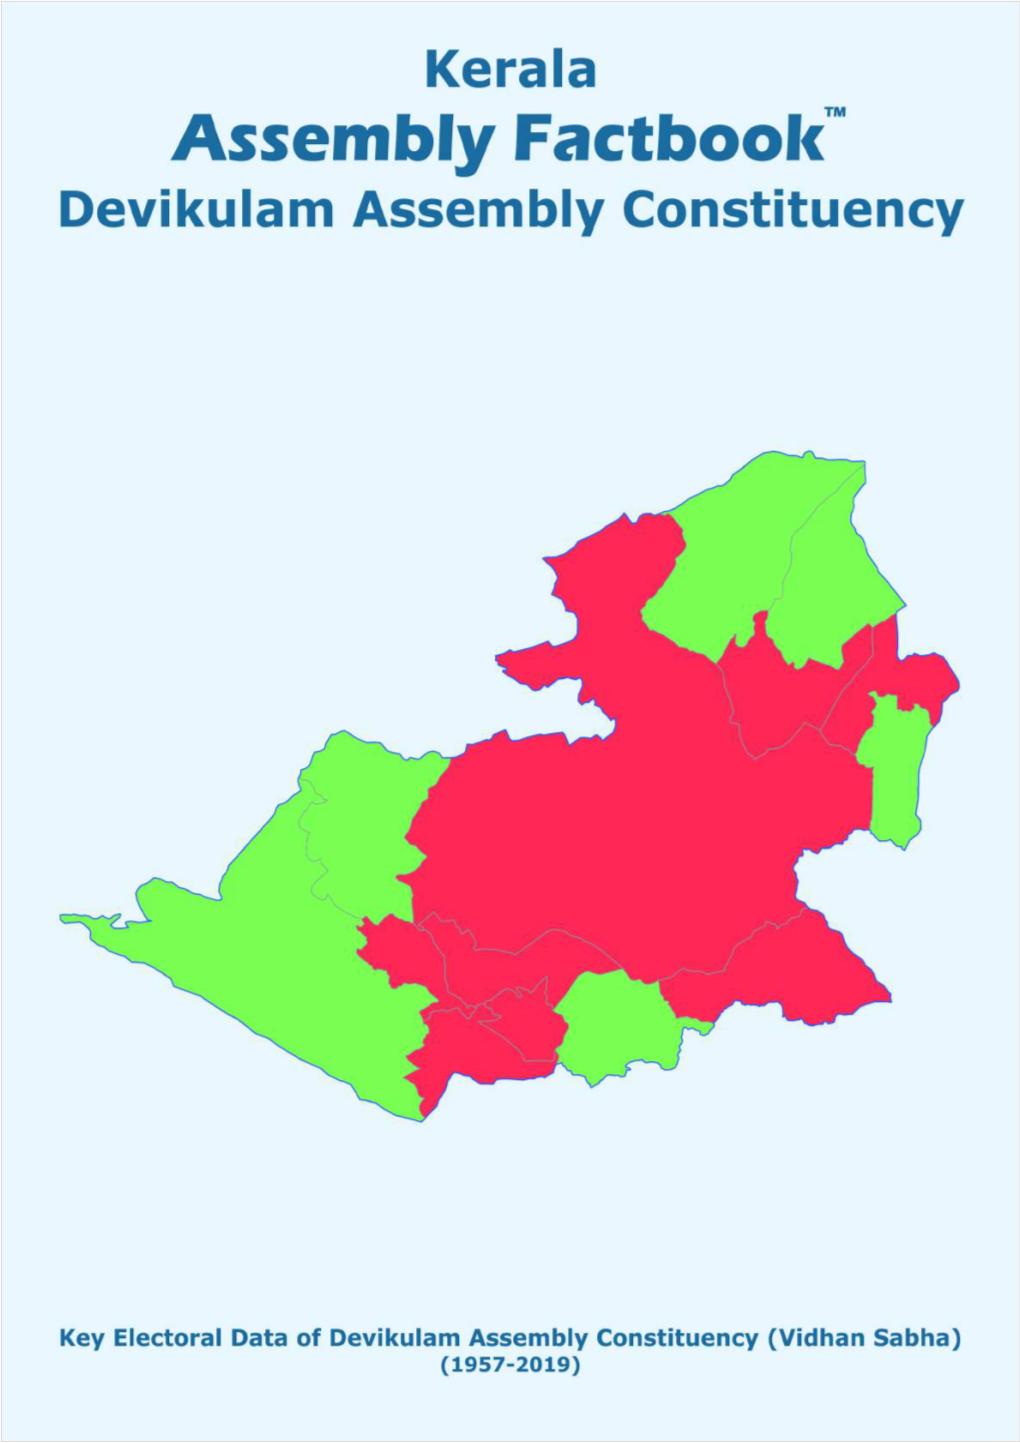 Key Electoral Data of Devikulam Assembly Constituency